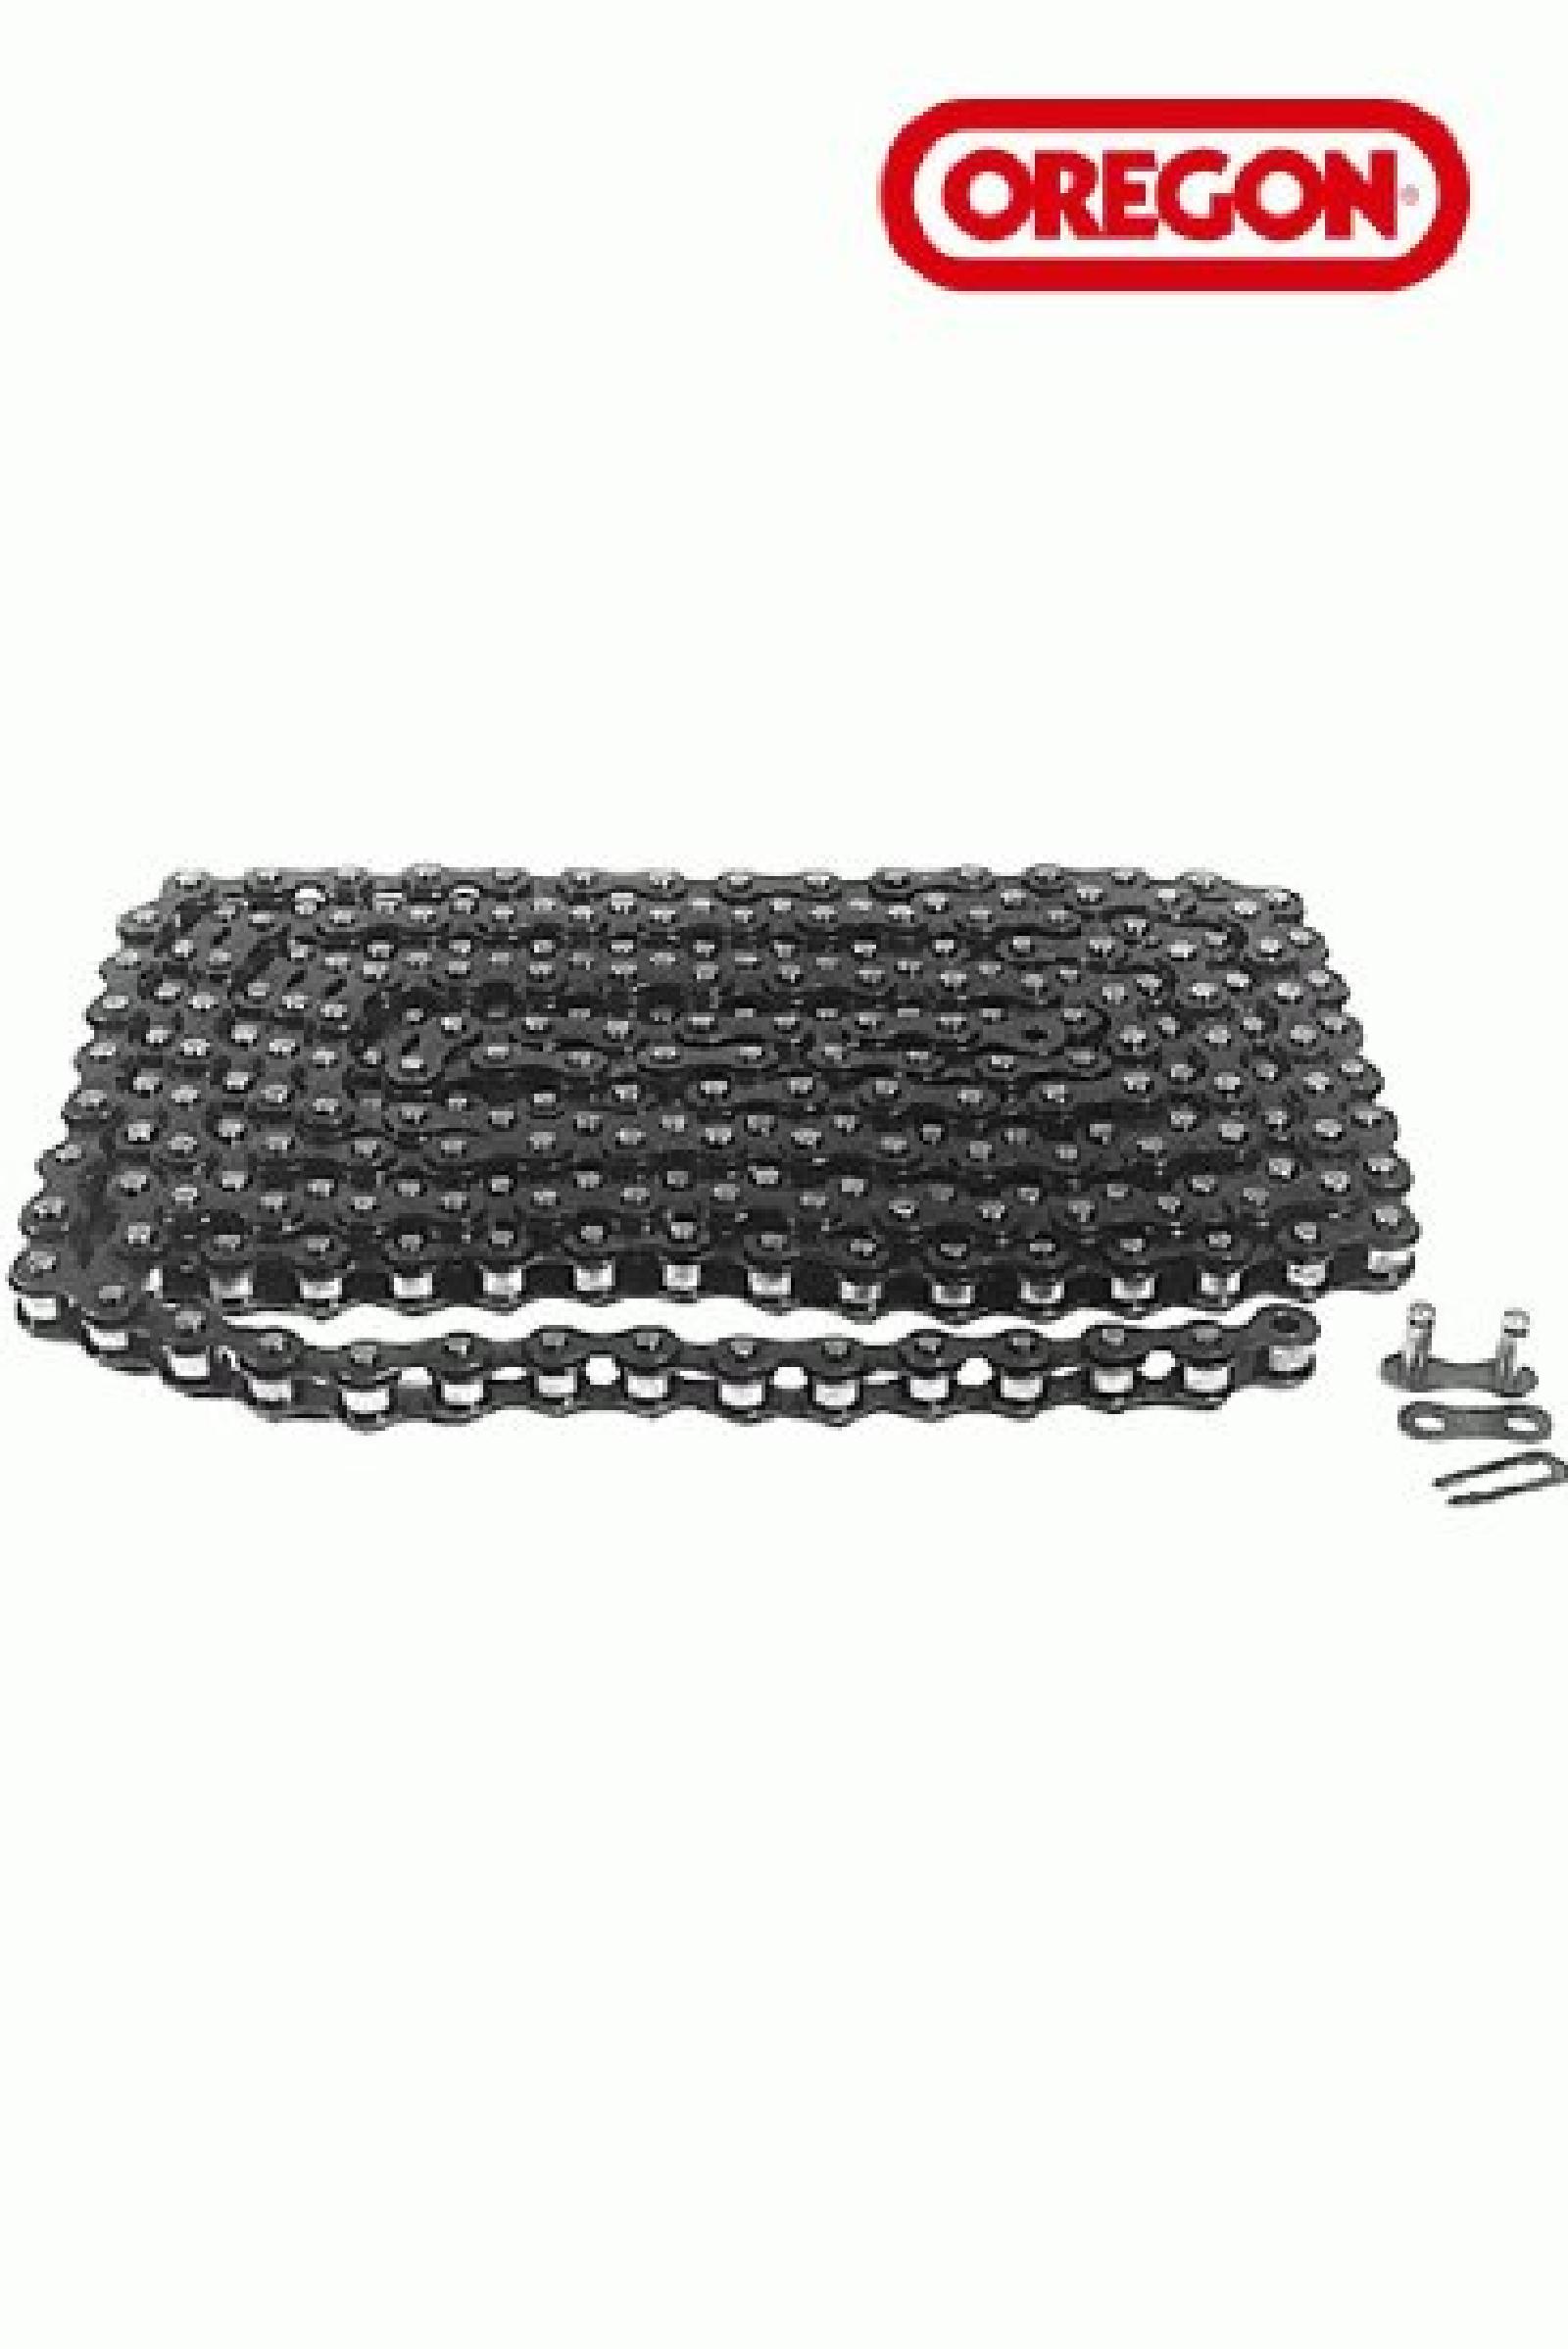 ROLLER CHAIN NO. 40 10FT part# 32-105 by Oregon